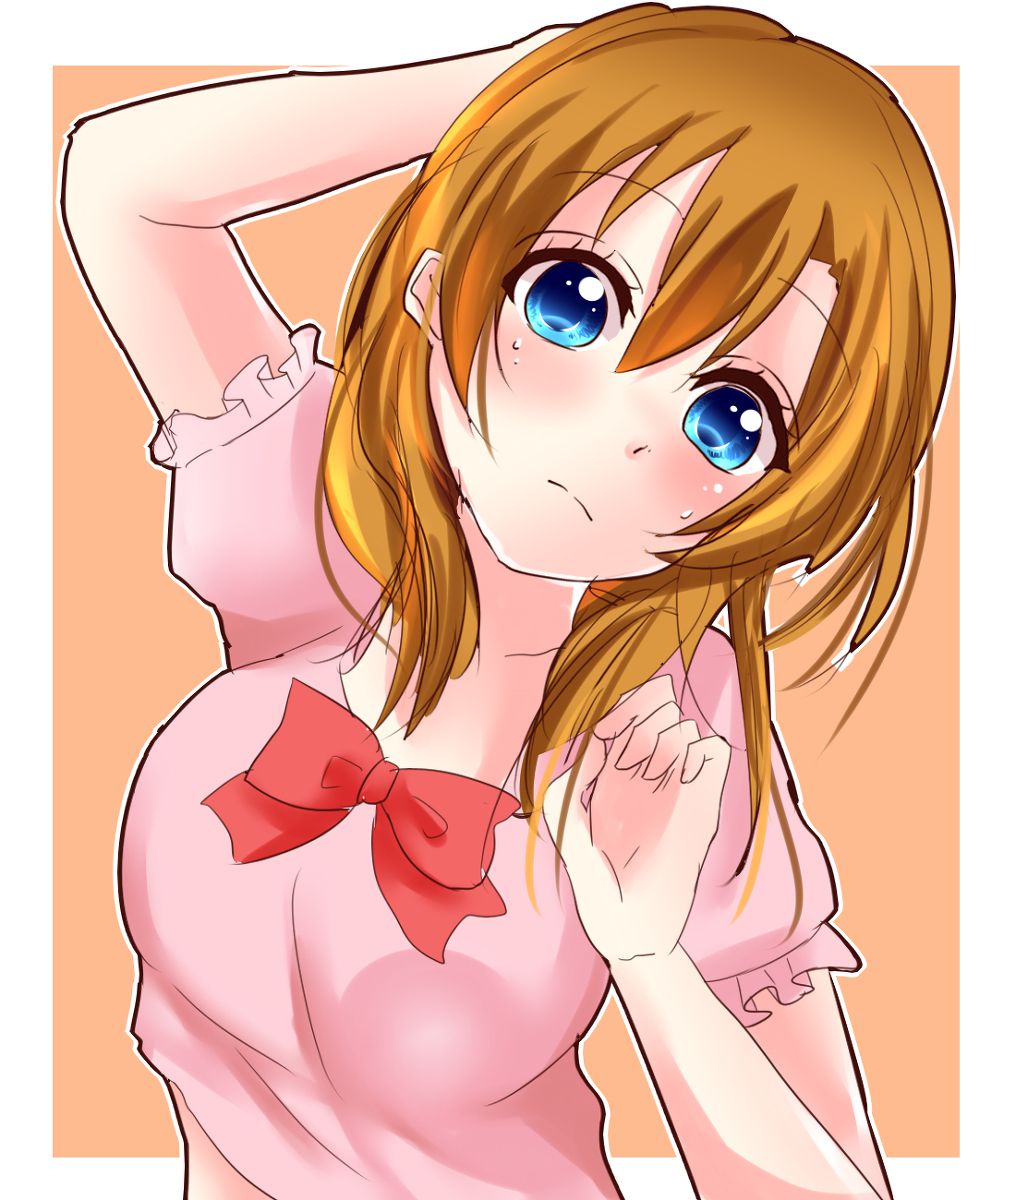 [God images] "love live! ' Erotic to a healthy ear Yoshino fruit Chan. illustrations and was once it's lost wwwww 39